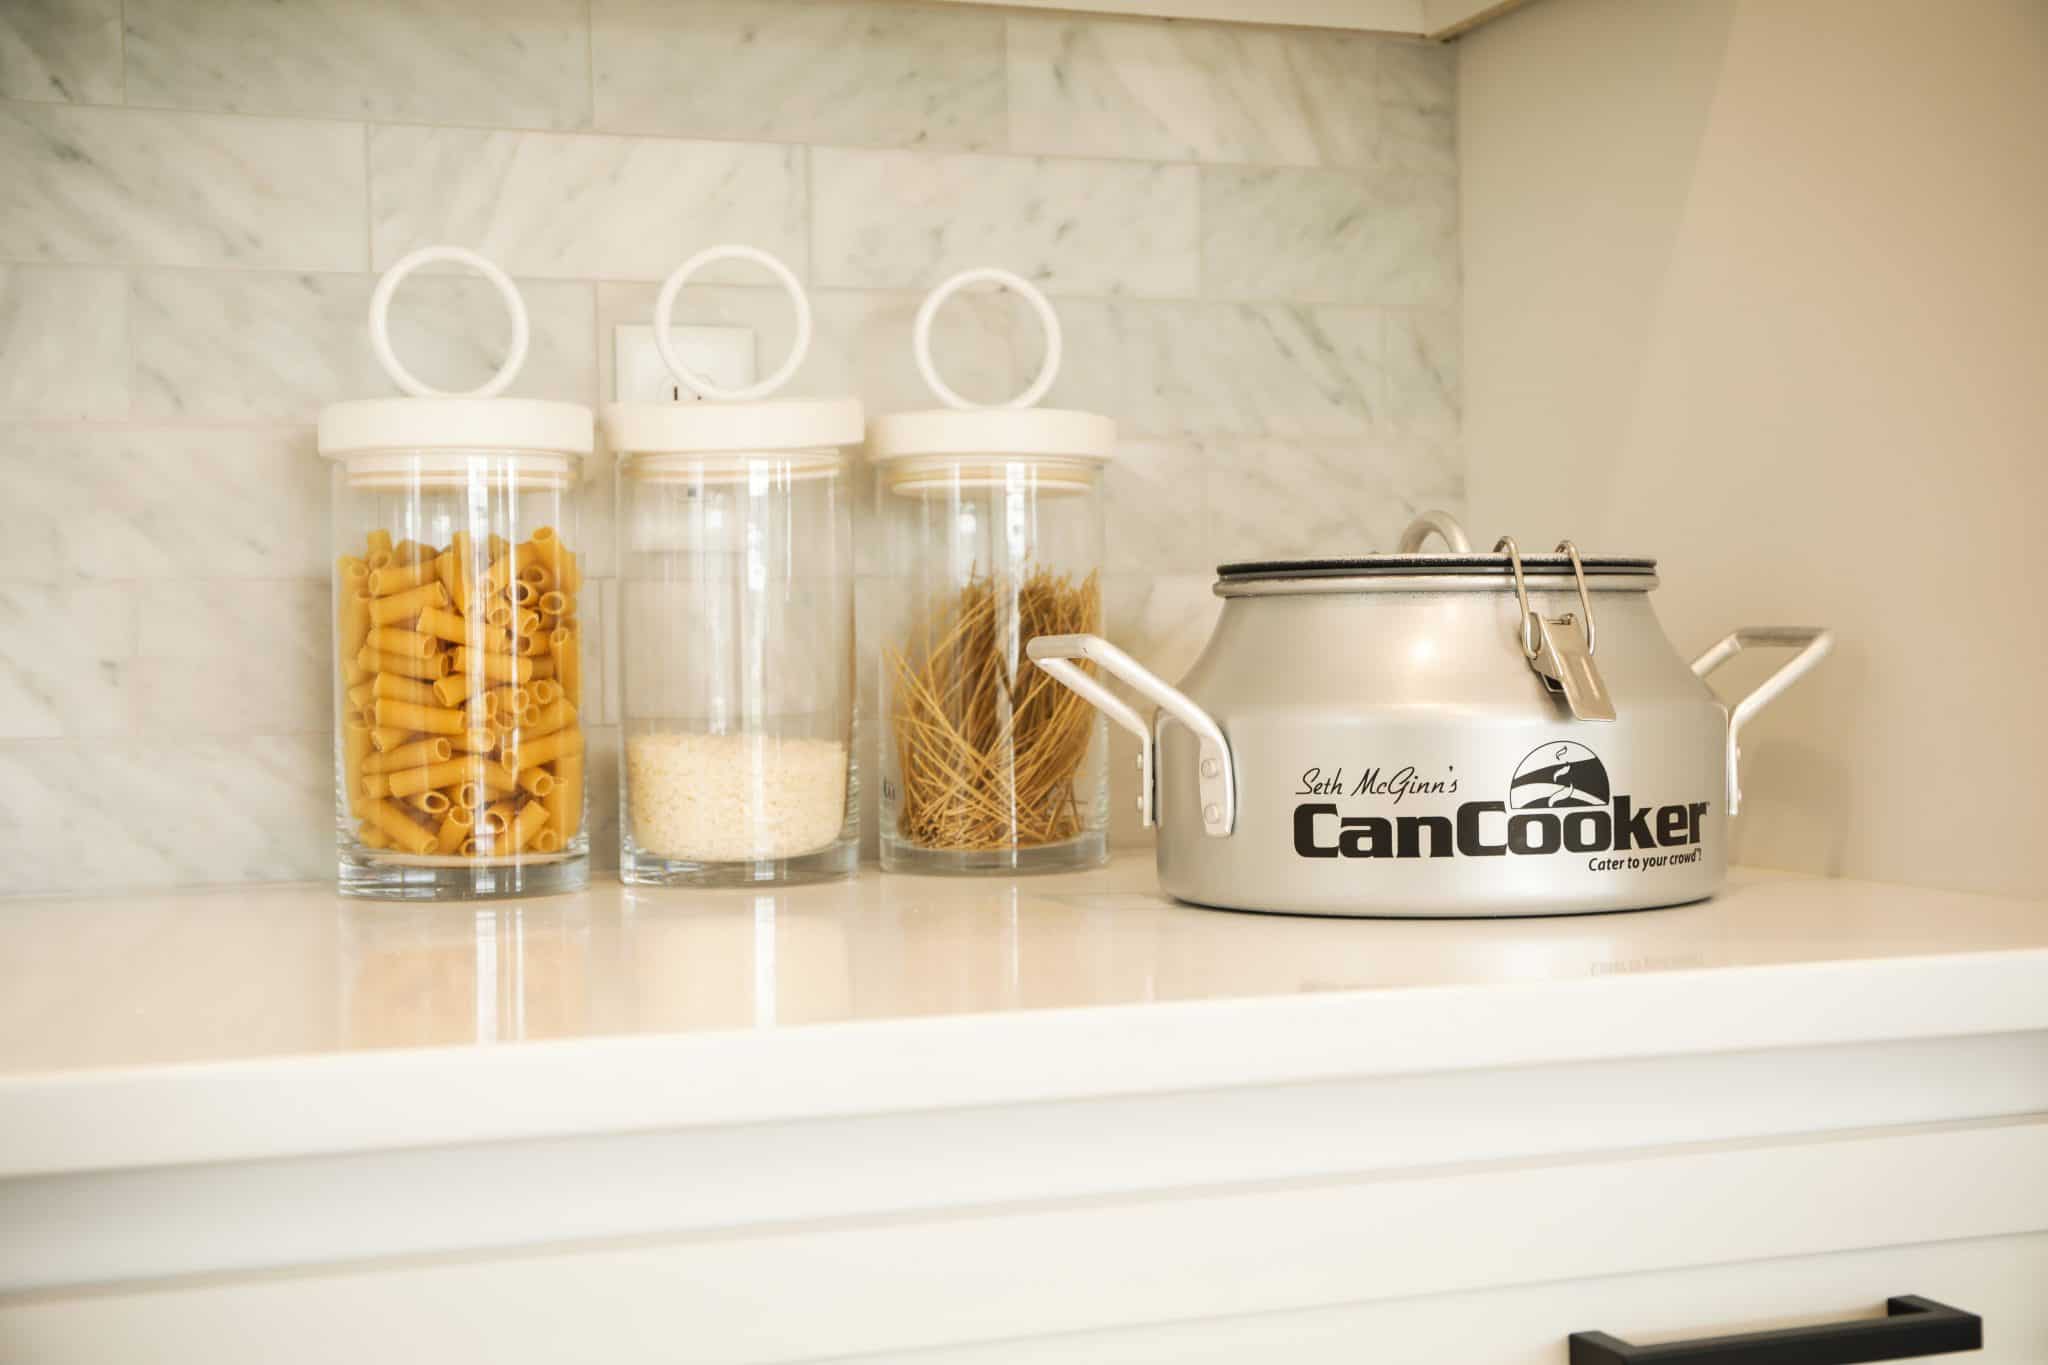 CanCooker Jr. with NON stick coating | CanCooker | Outdoors